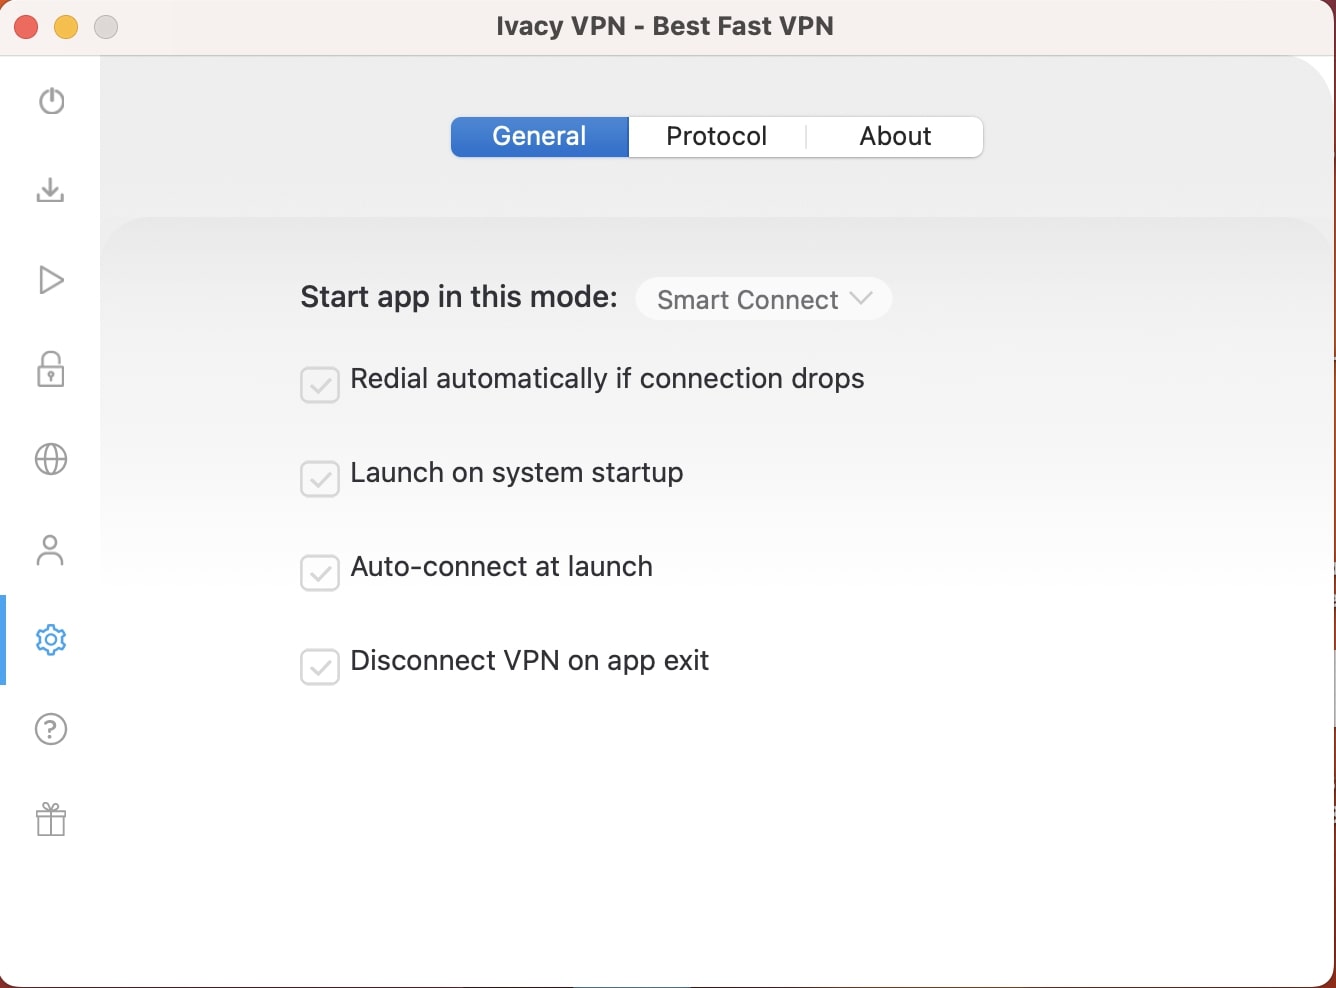 Kill switch screen for Ivacy VPN